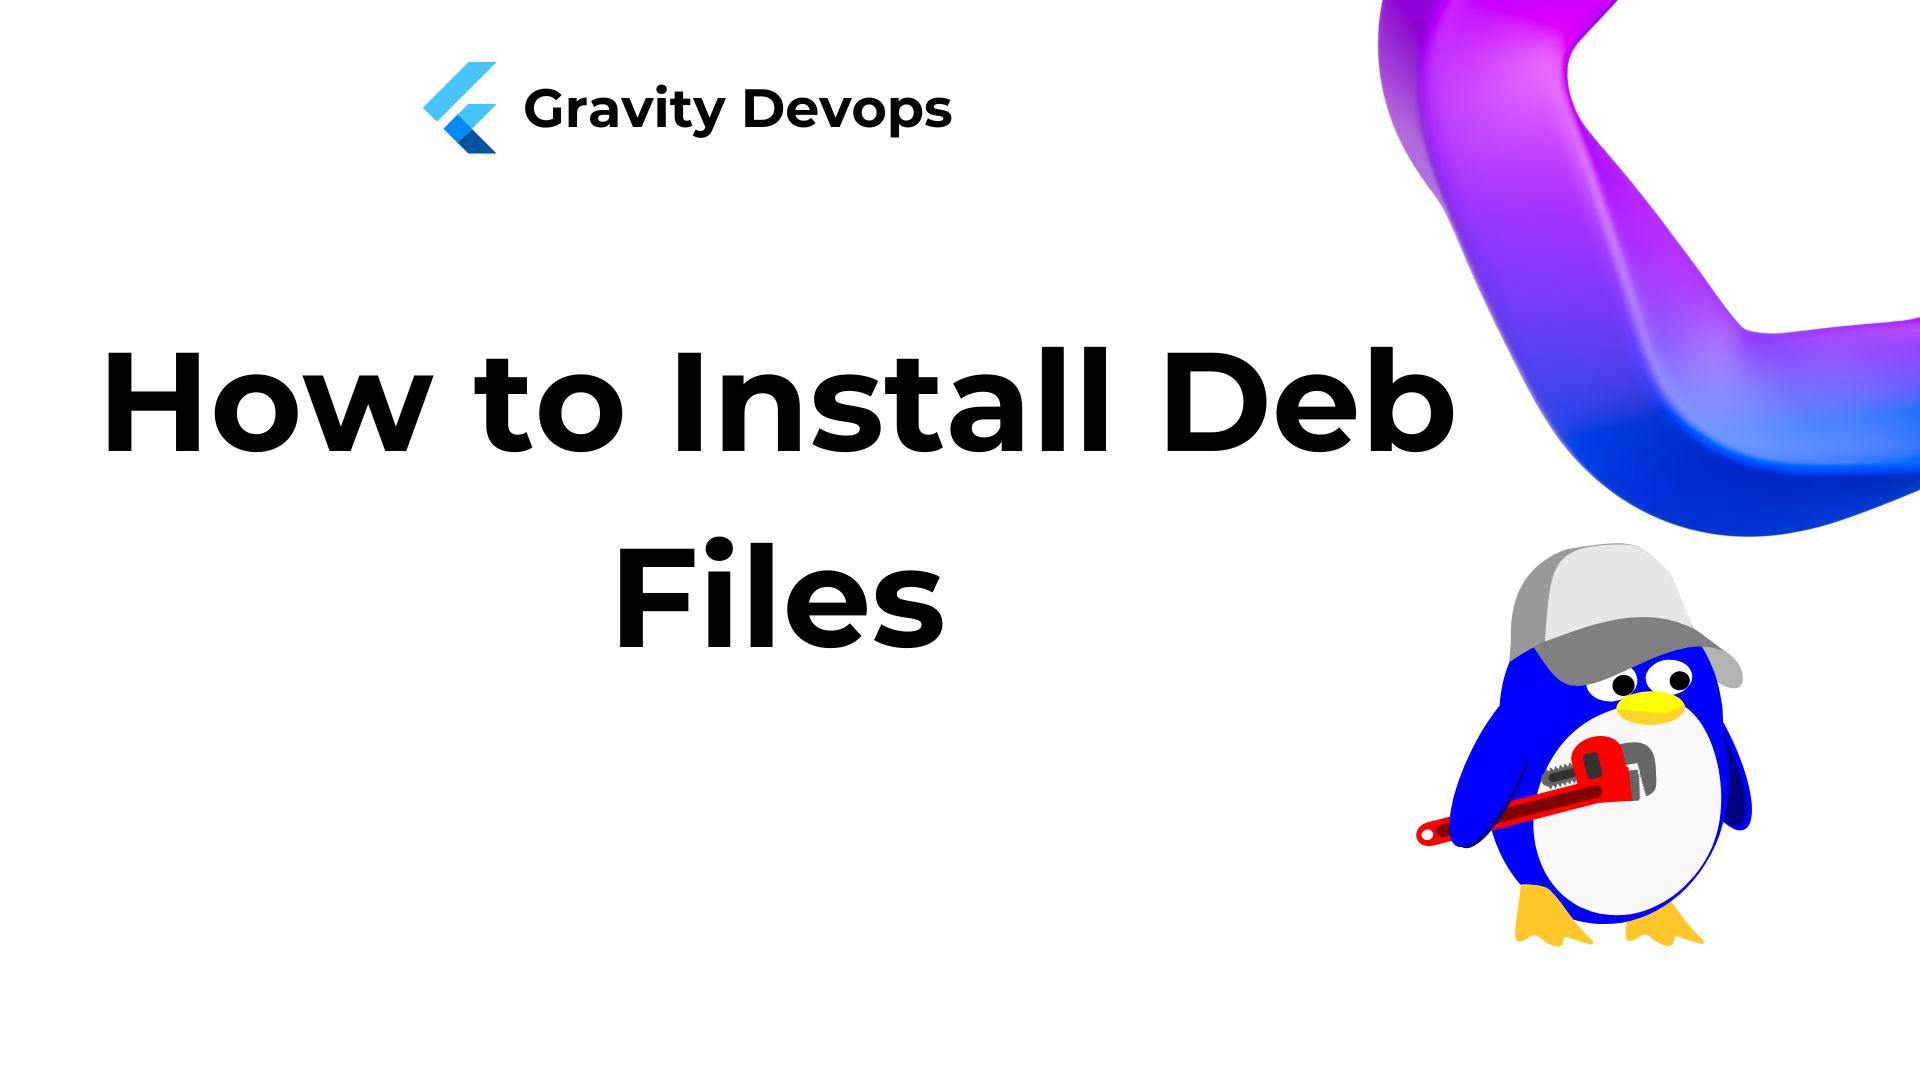 How to Install Deb Files